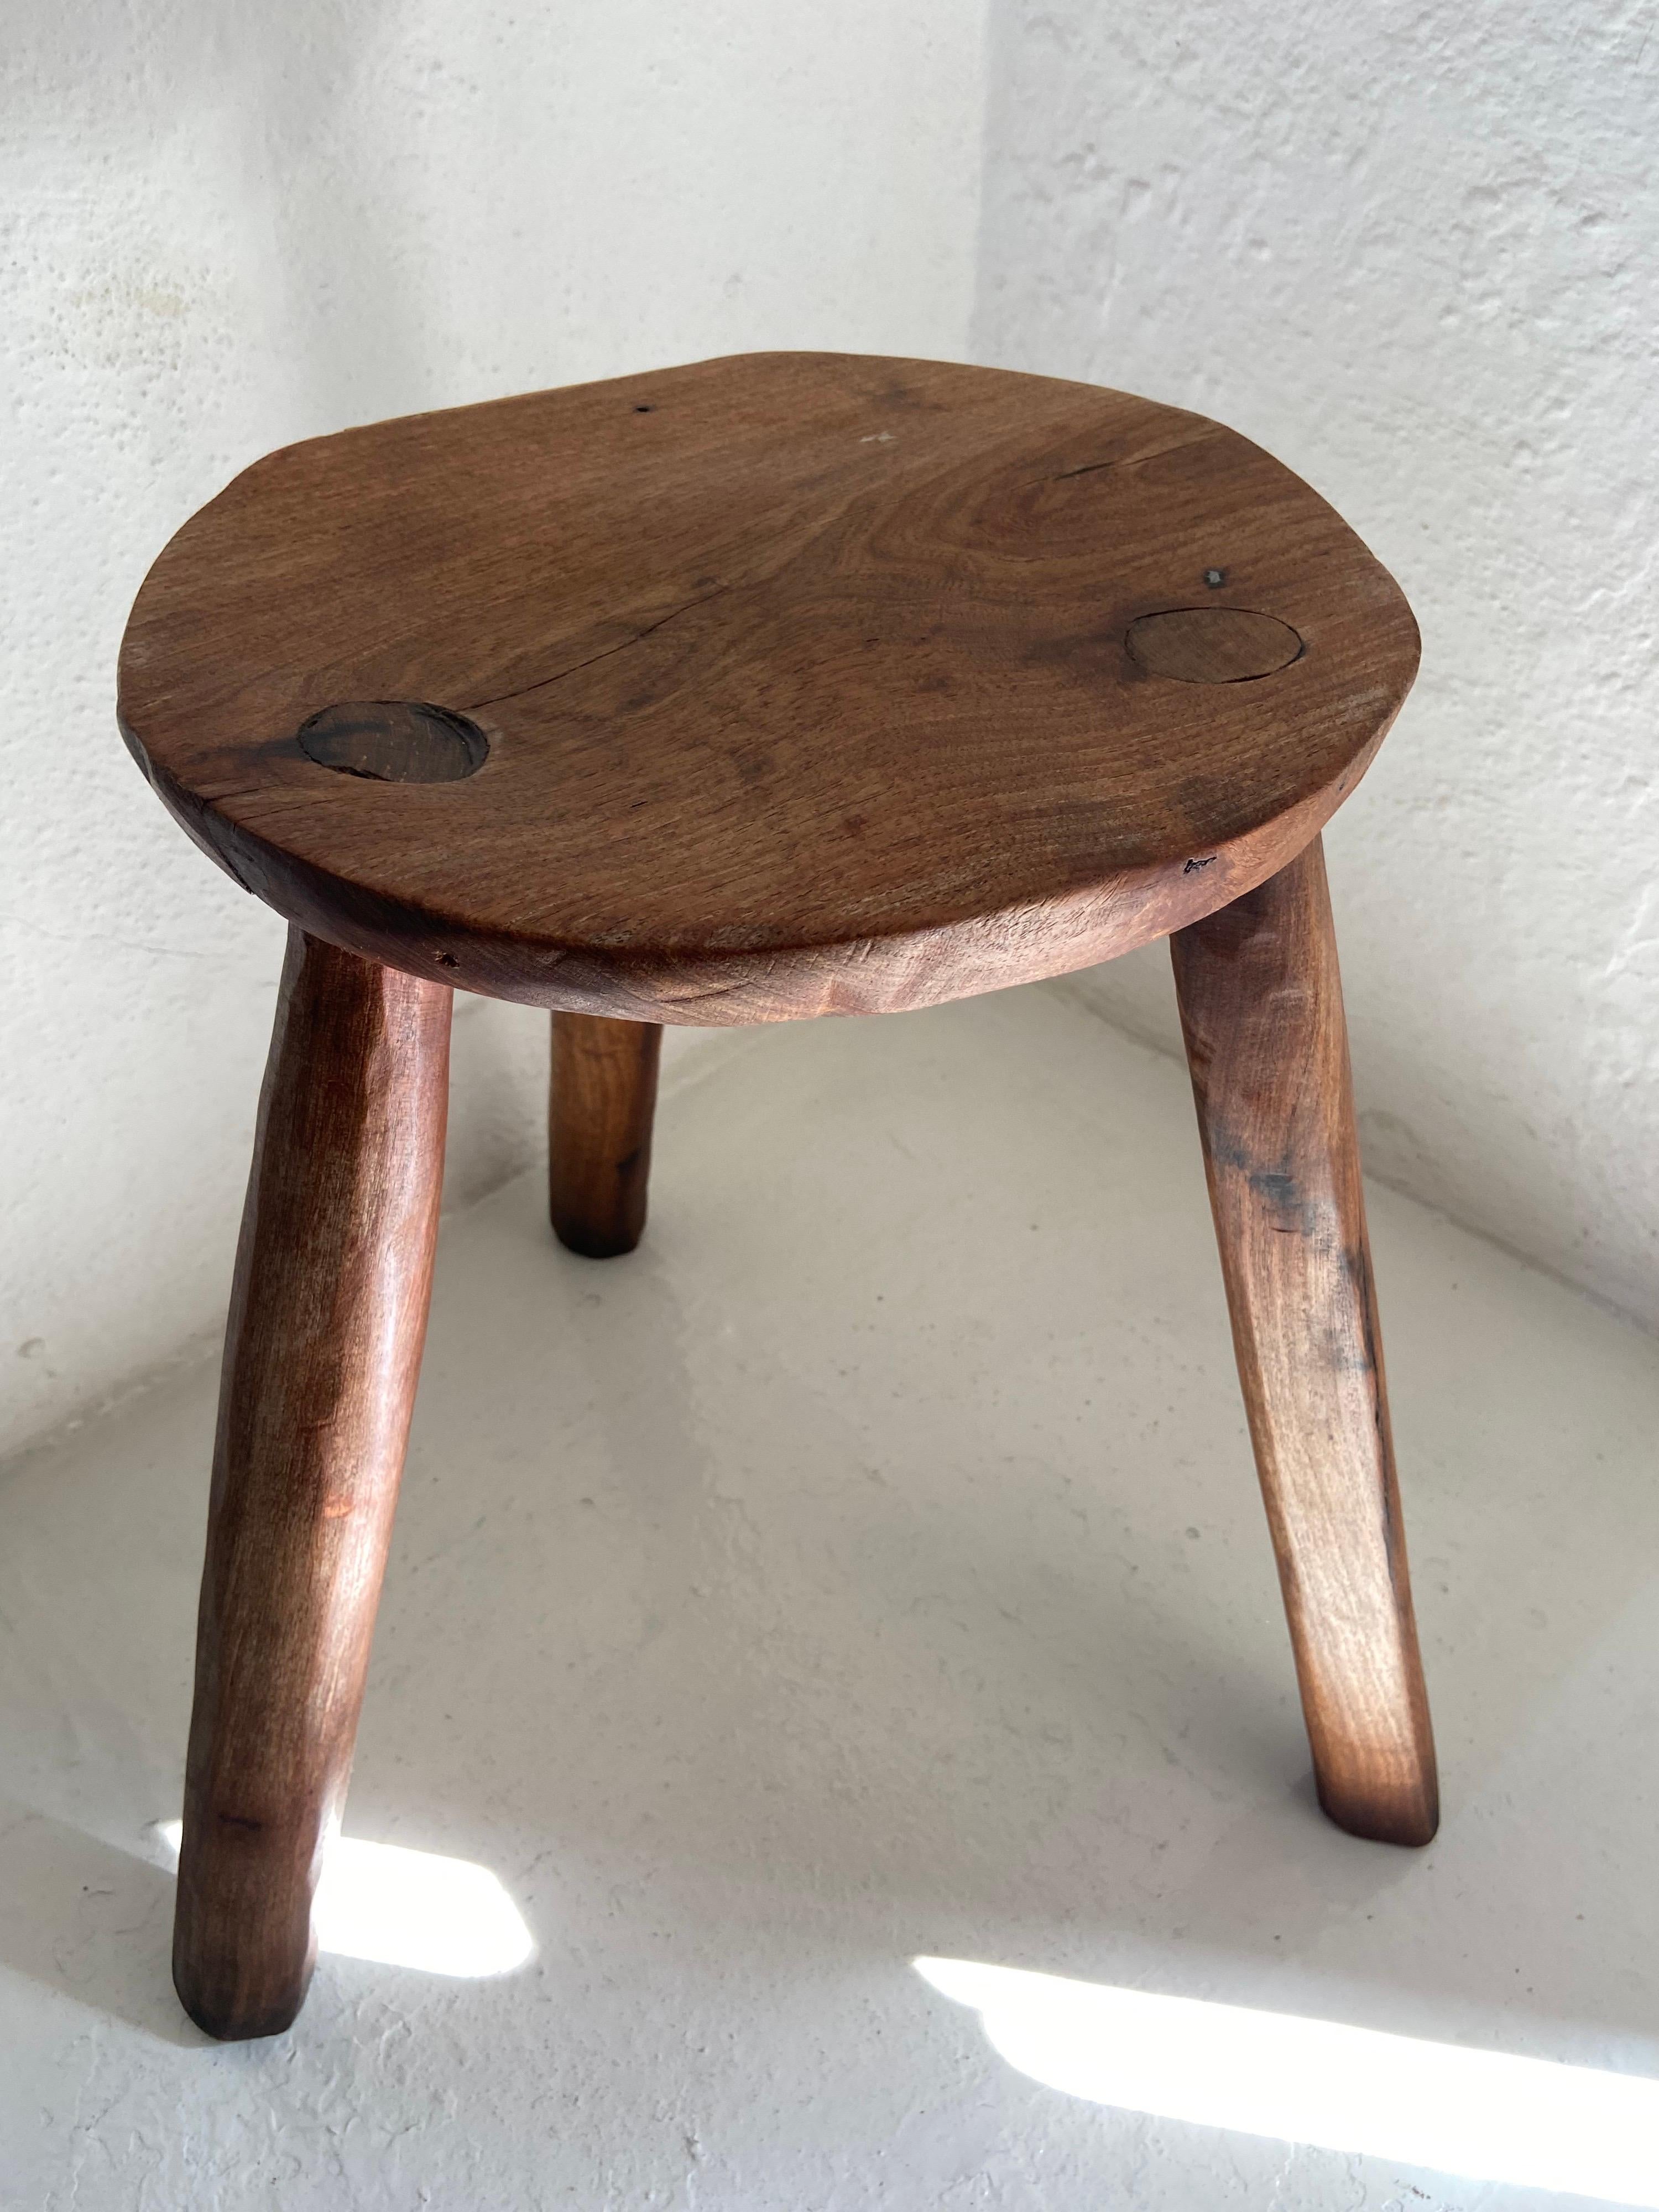 Hand-Carved Hardwood Stool from Mexico, circa 1970s